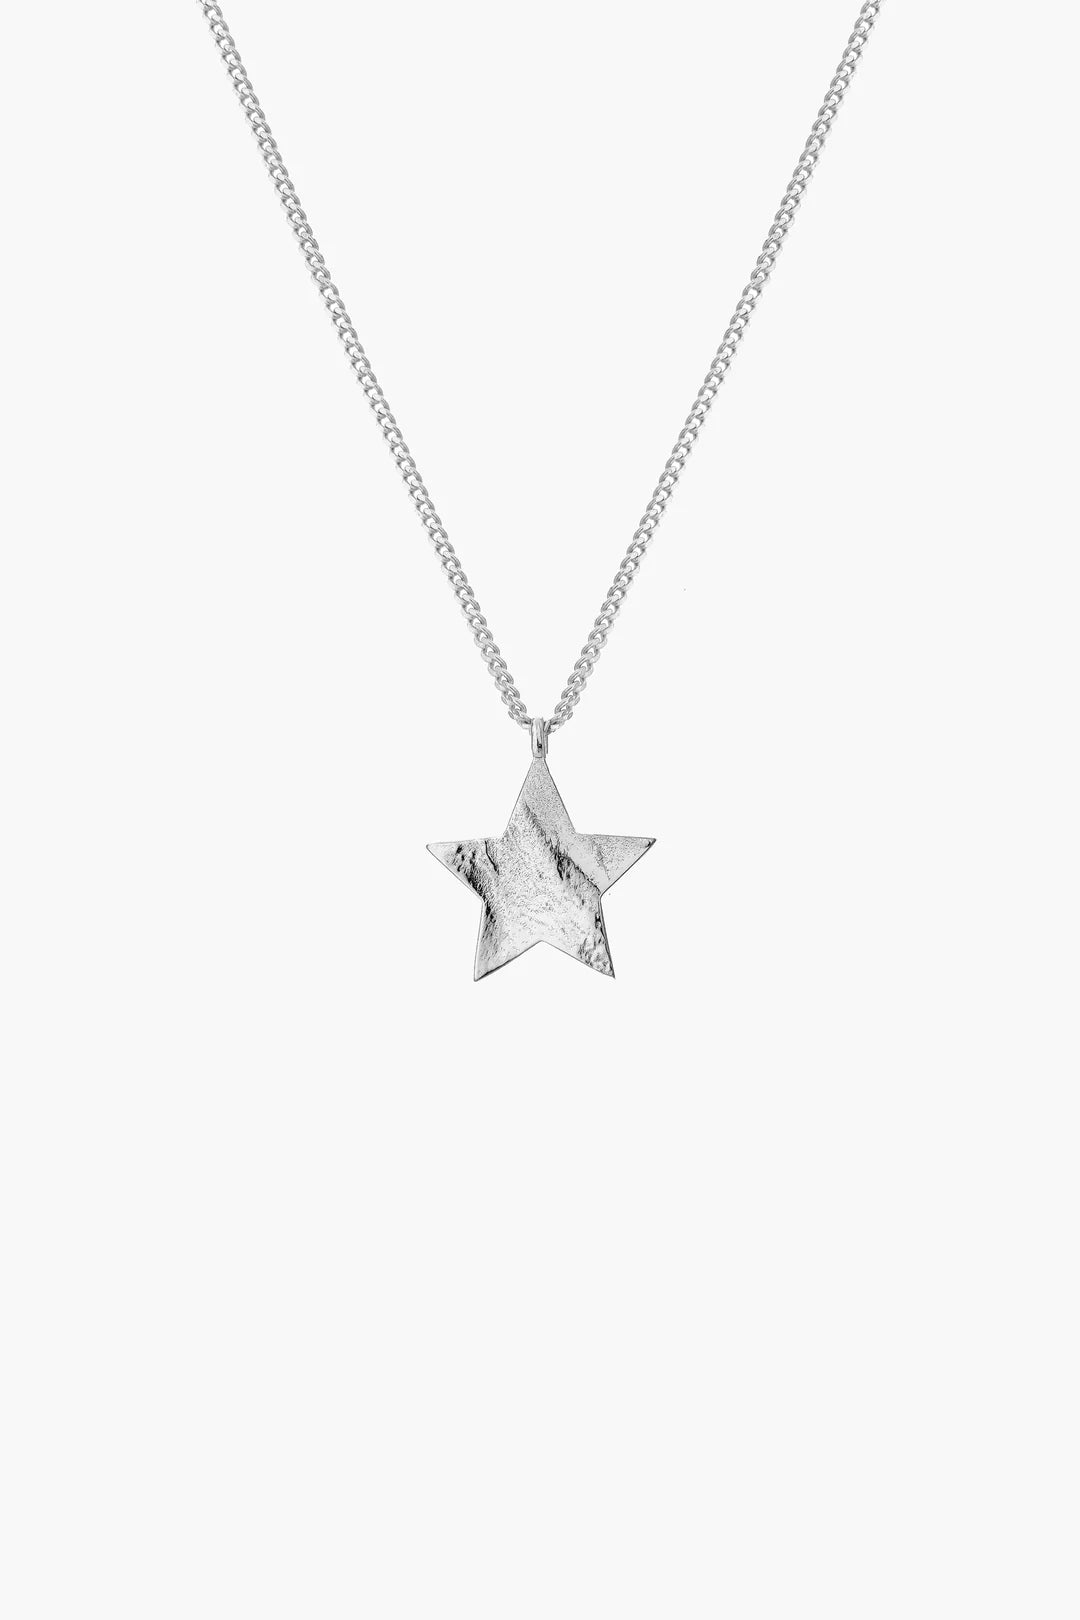 DISTANCE SILVER NECKLACE